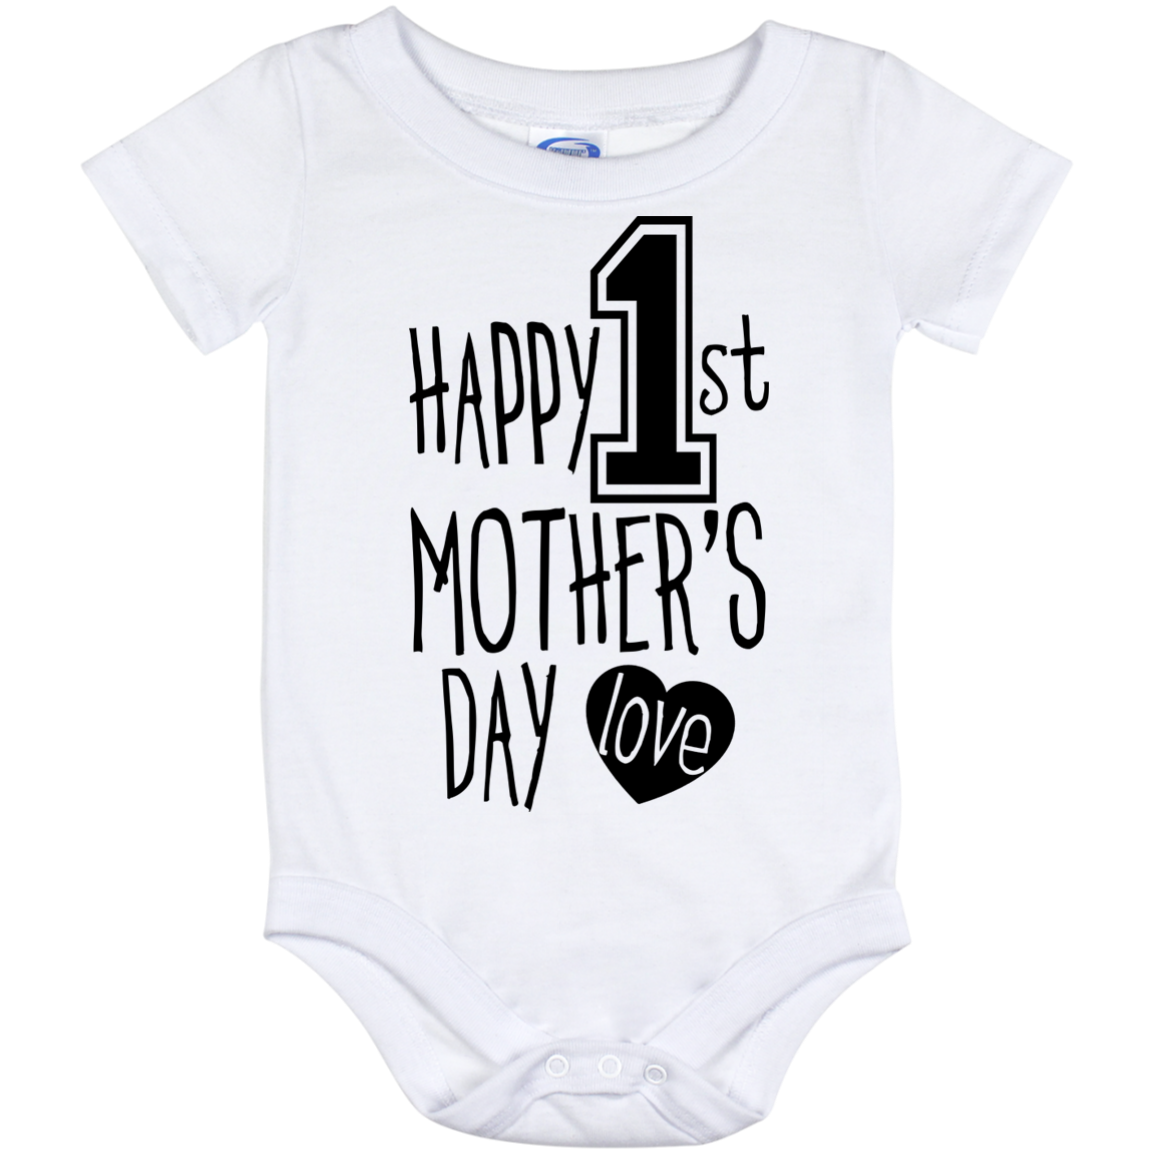 Happy 1St Mother’S Day Love – Baby Onesie 6, 12, 24 Month – Teeever